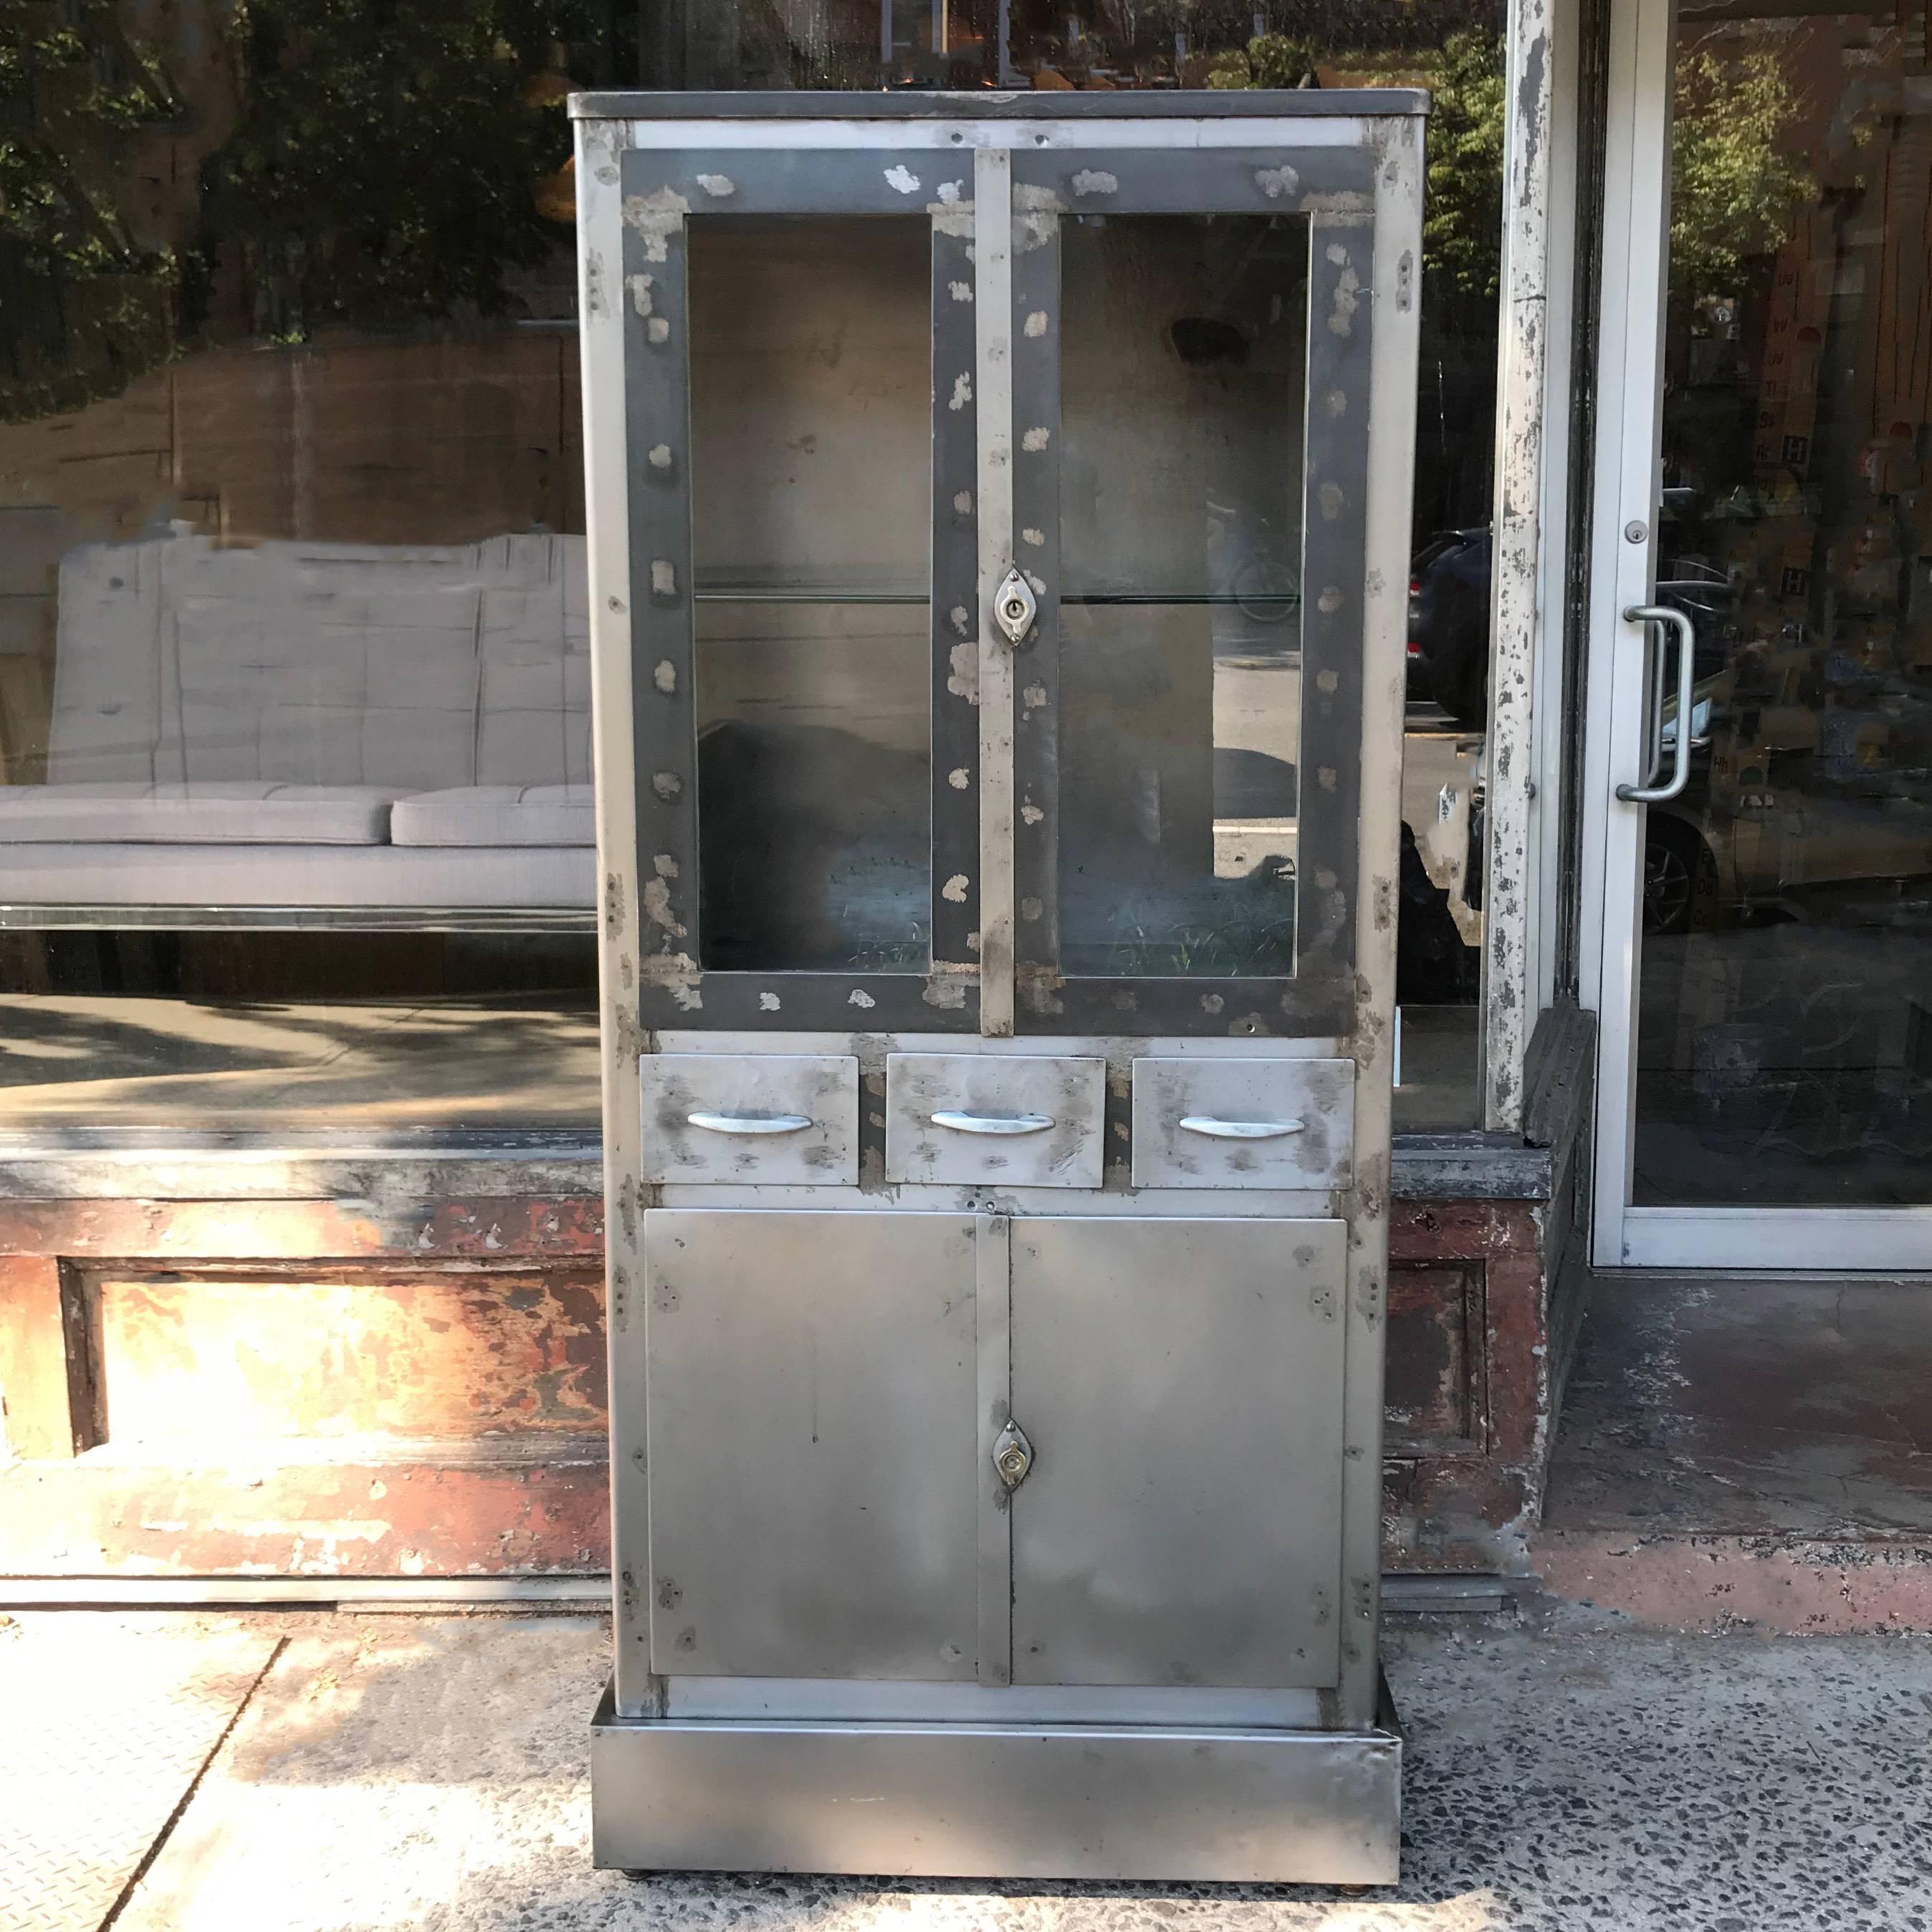 Art Deco, Industrial, brushed steel, medical apothecary cabinet or vitrine features glass front display on top and closed storage on the bottom. The cabinet body measures 31 inches wide x 15 inches deep.